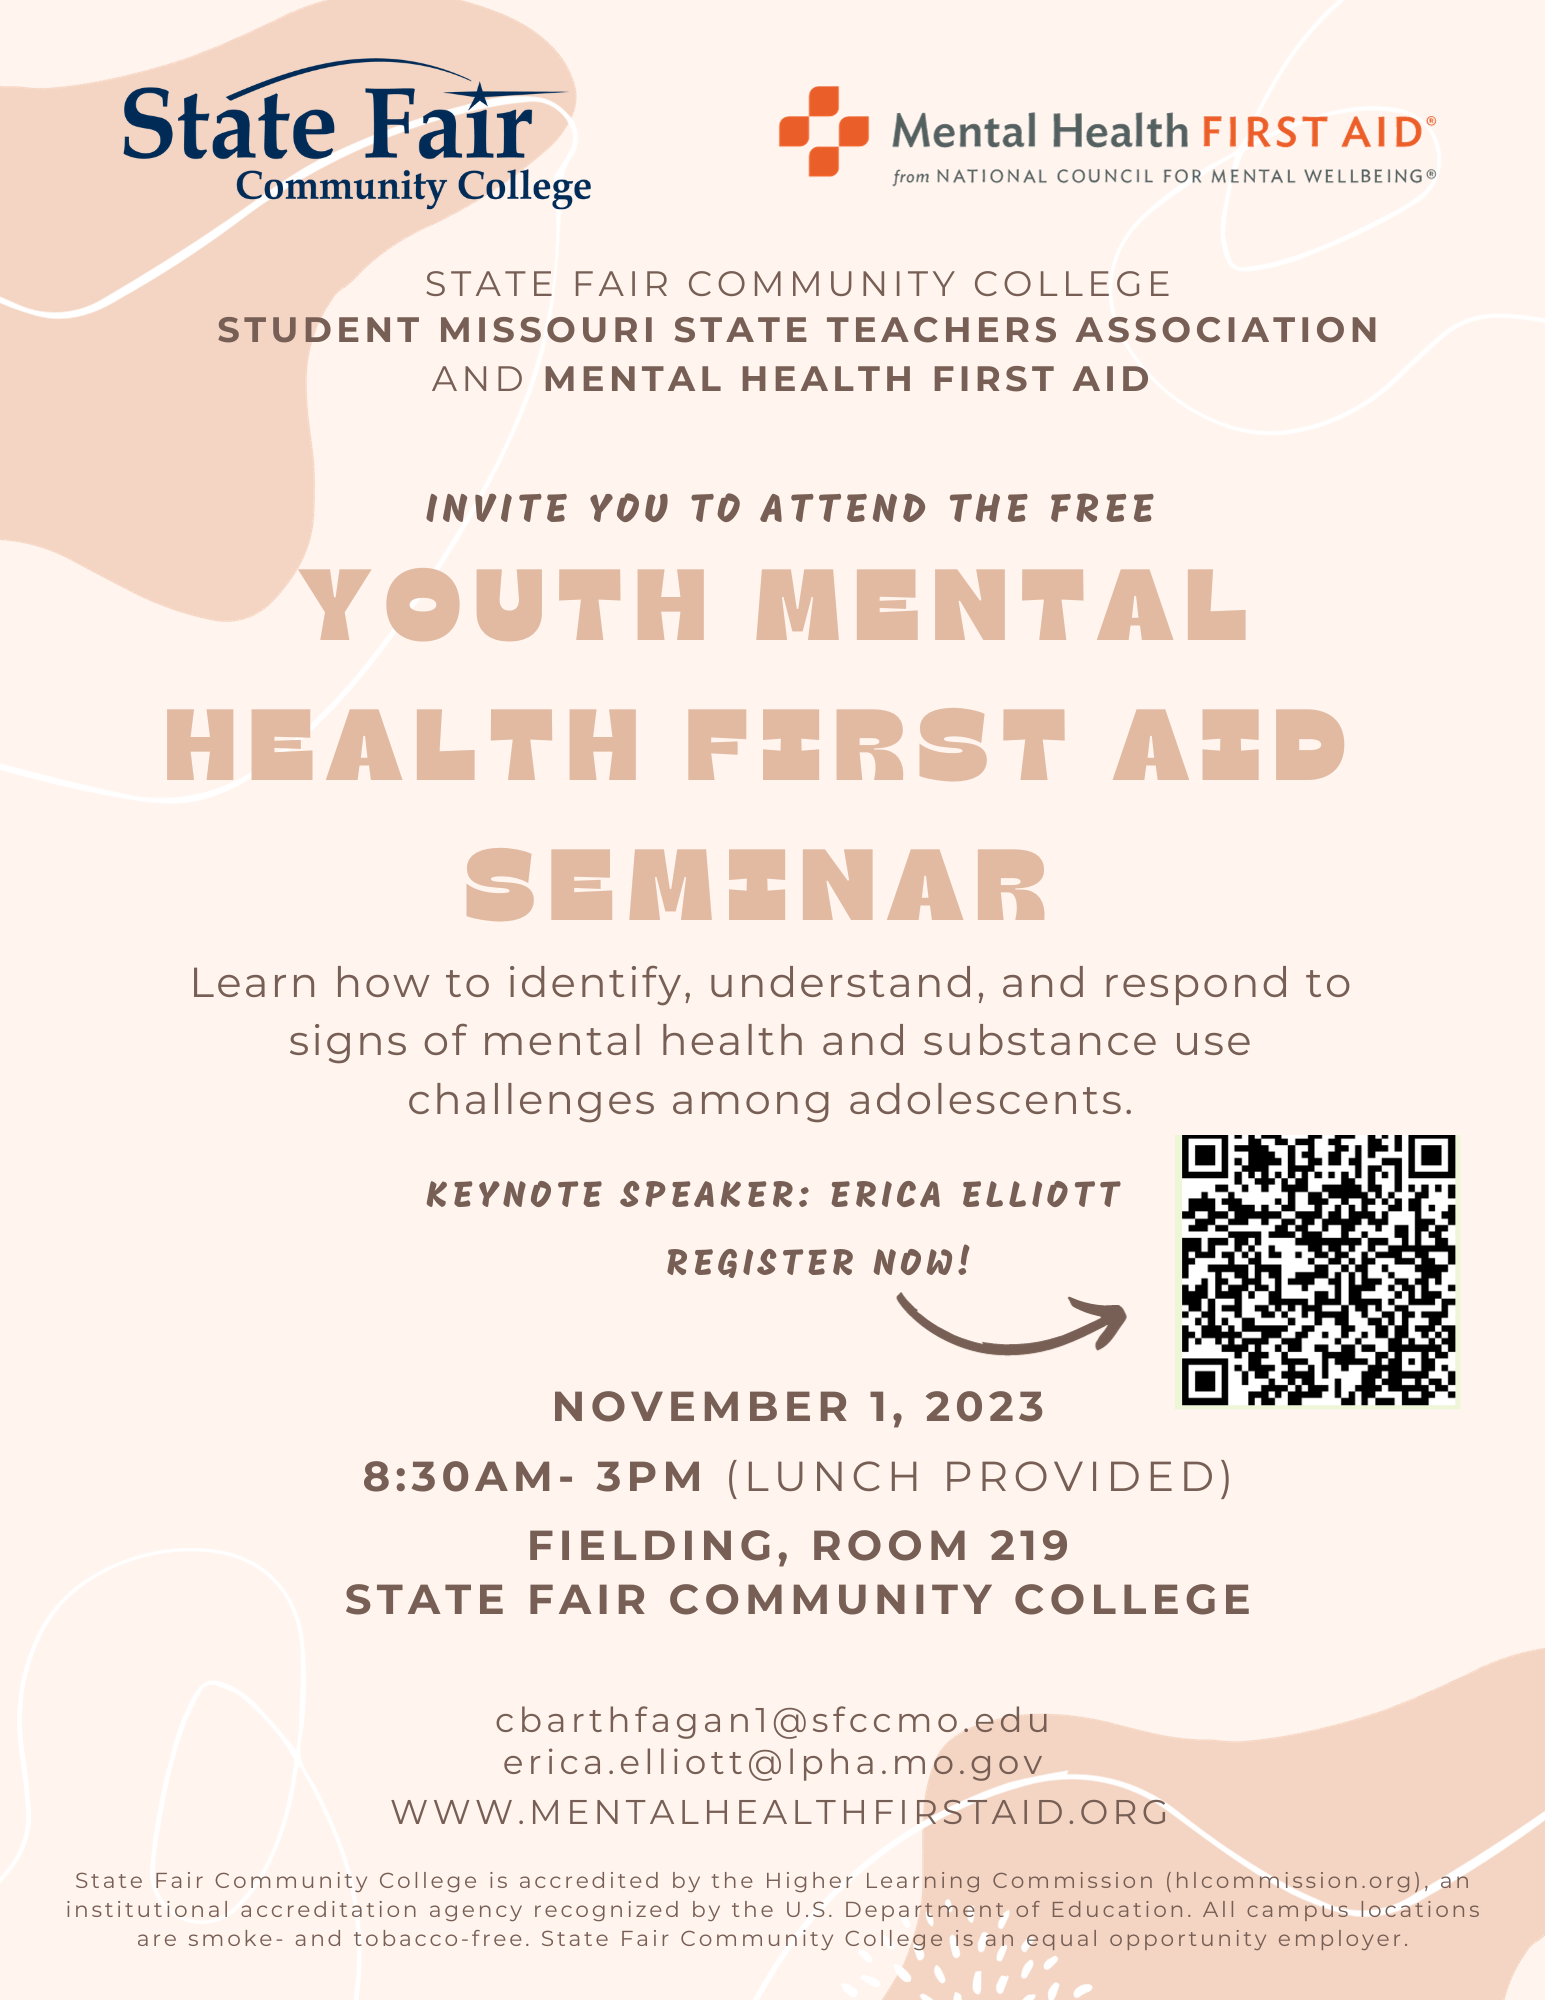 Read more about SFCC to host Youth Mental Health First Aid seminar